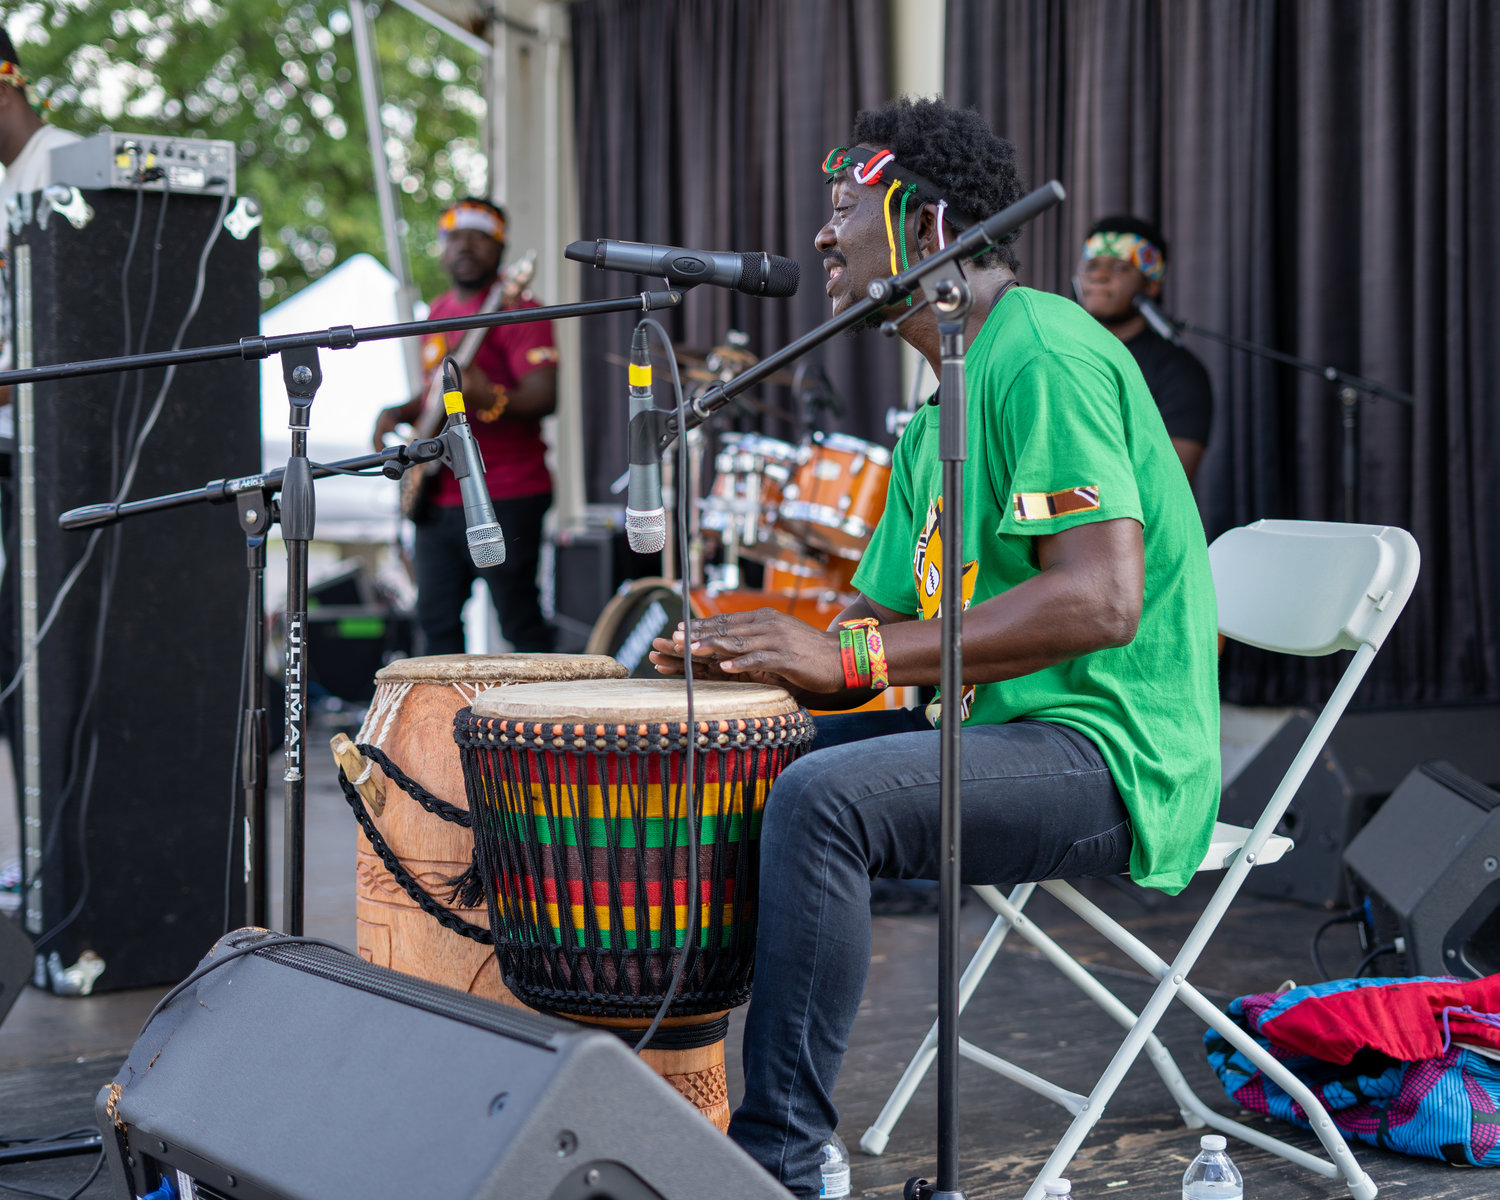 The African Crusaders drummer performs.